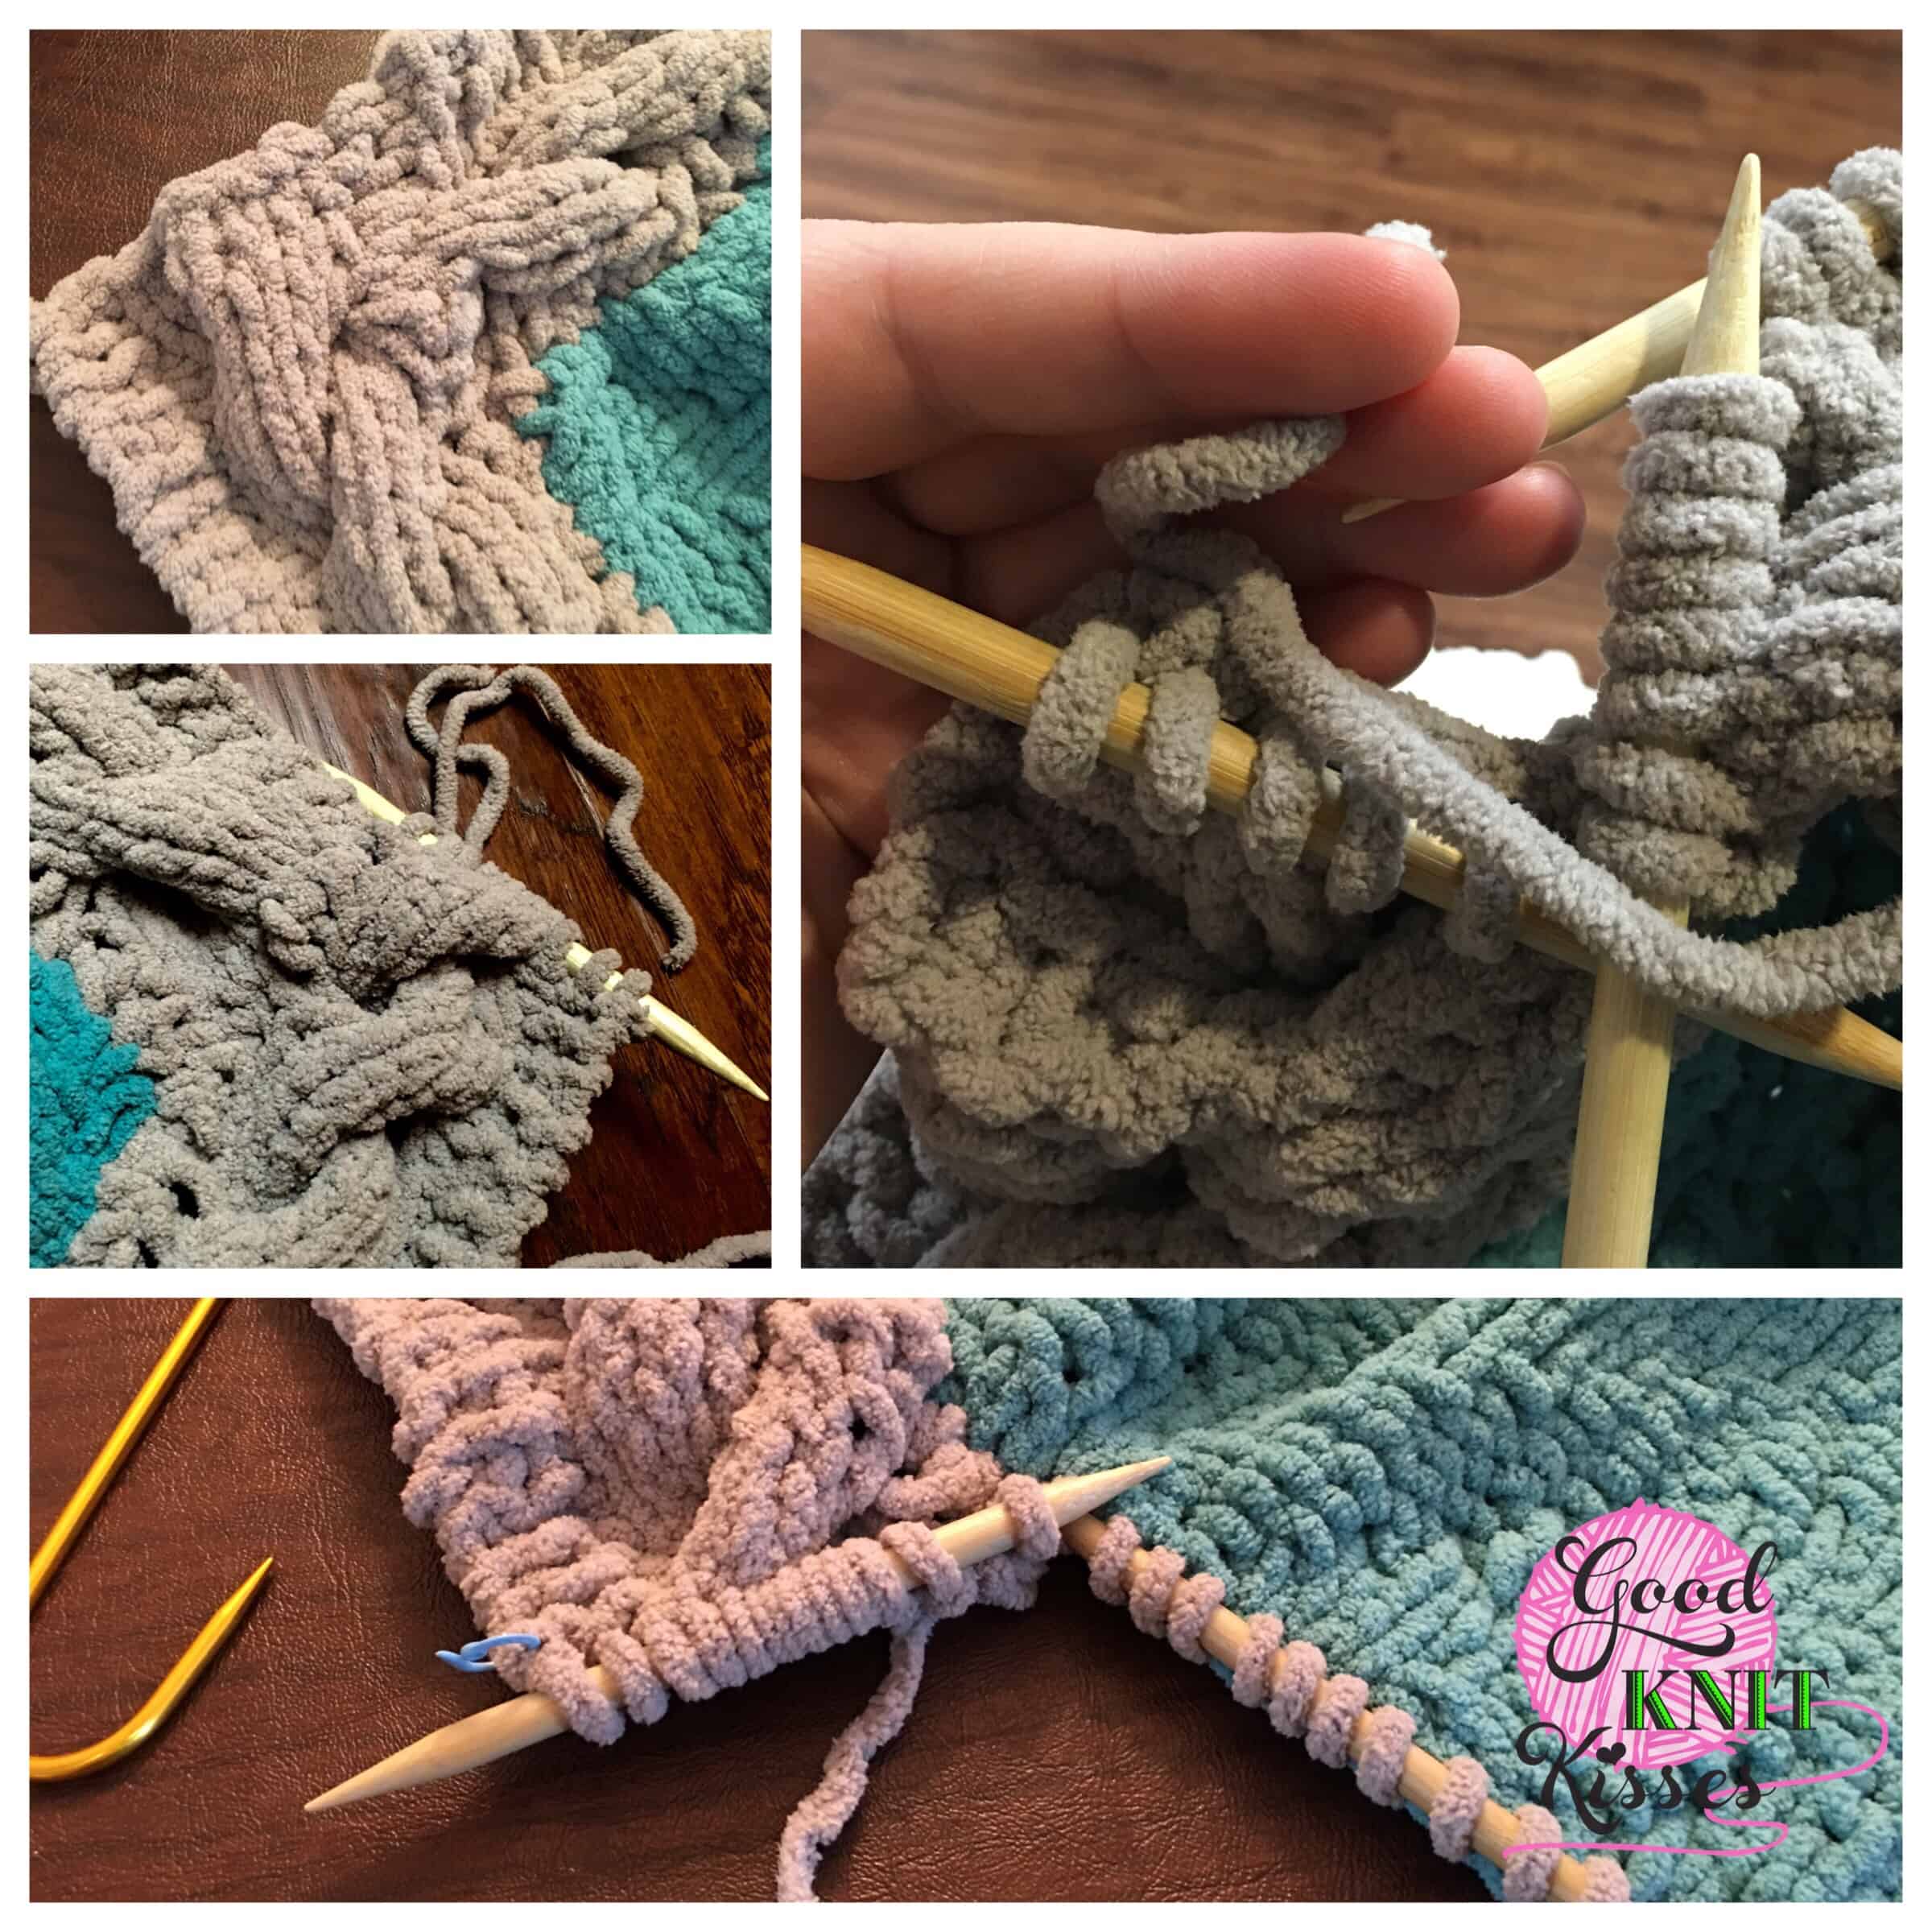 Knitting Class: Knit Along (KAL) Punch Card (10 Sessions